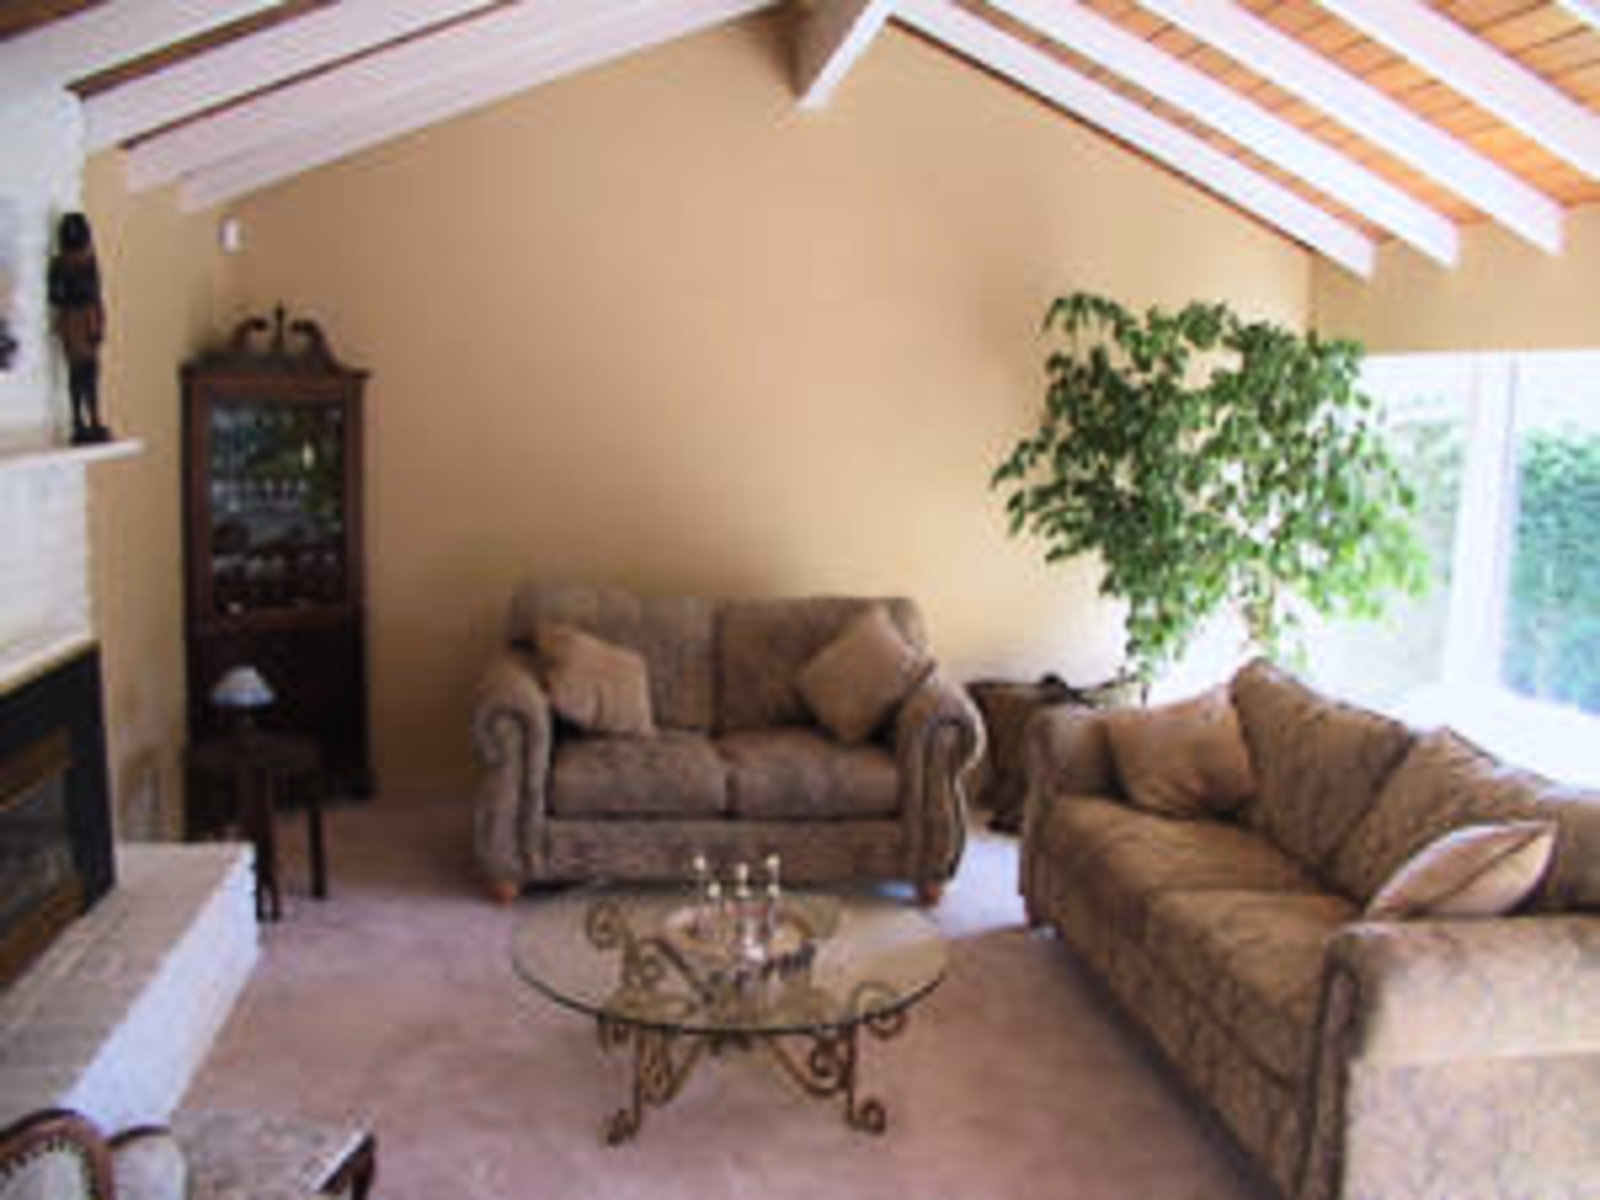 Living Room with gas fireplace and vaulted ceilings